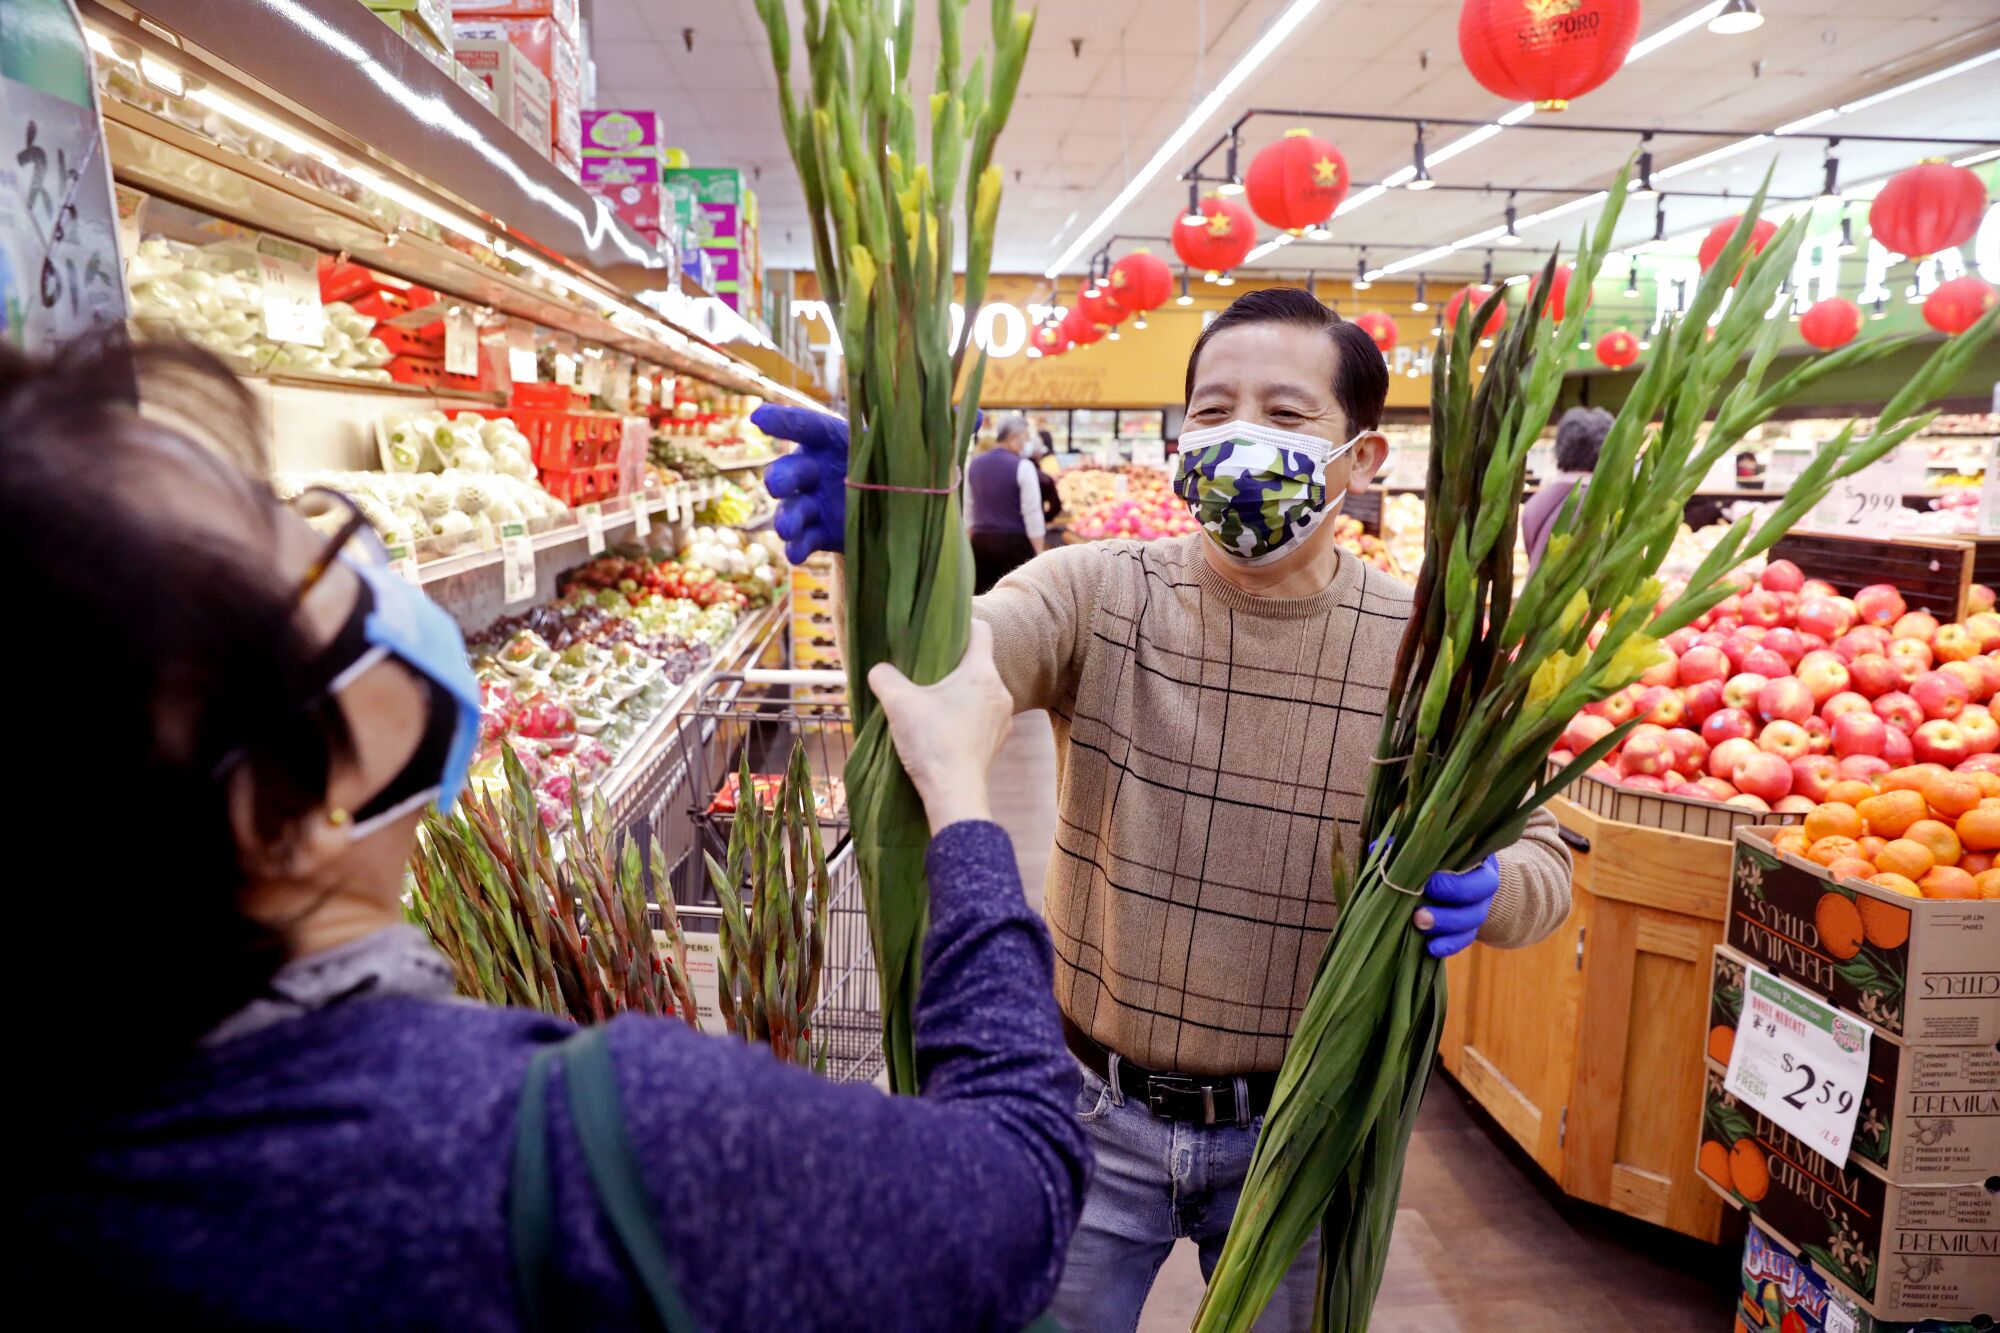 Produce manager Peter Dao, right, helps a customer select fresh gladiolus flowers at the Great Wall Supermarket.